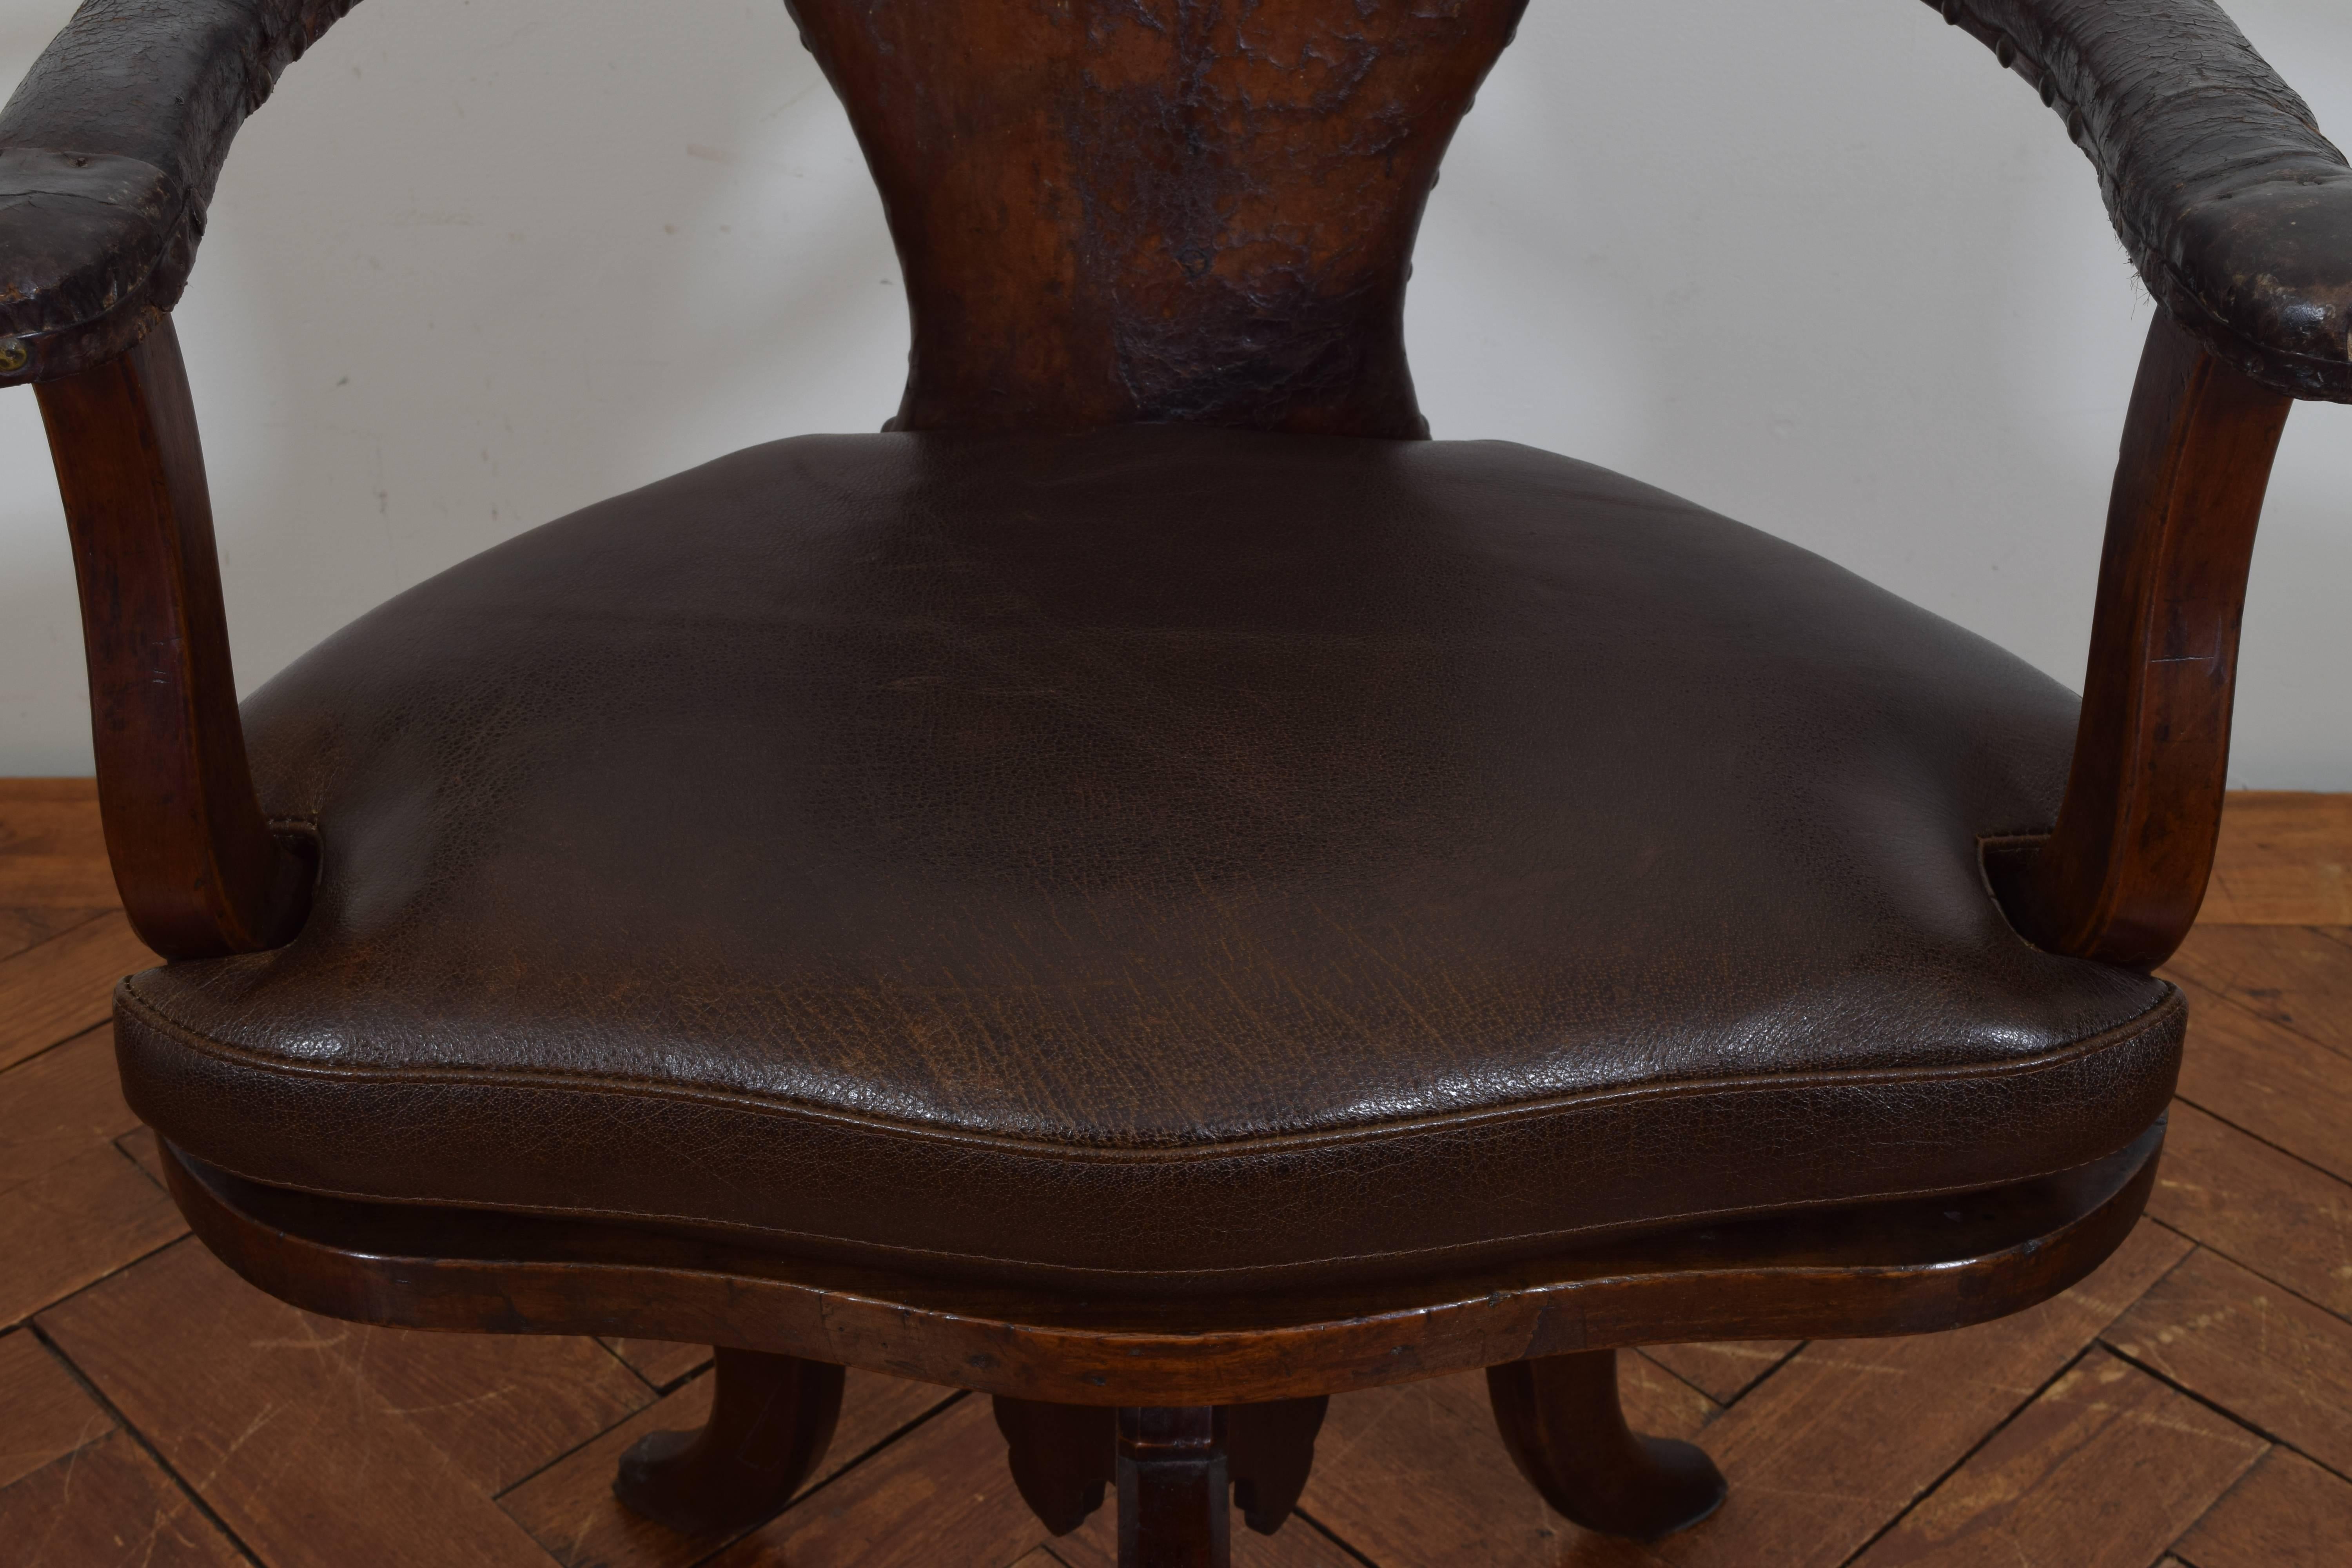 Italian Baroque Walnut and Leather Upholstered Swivel Chair, Early 17th Century 2